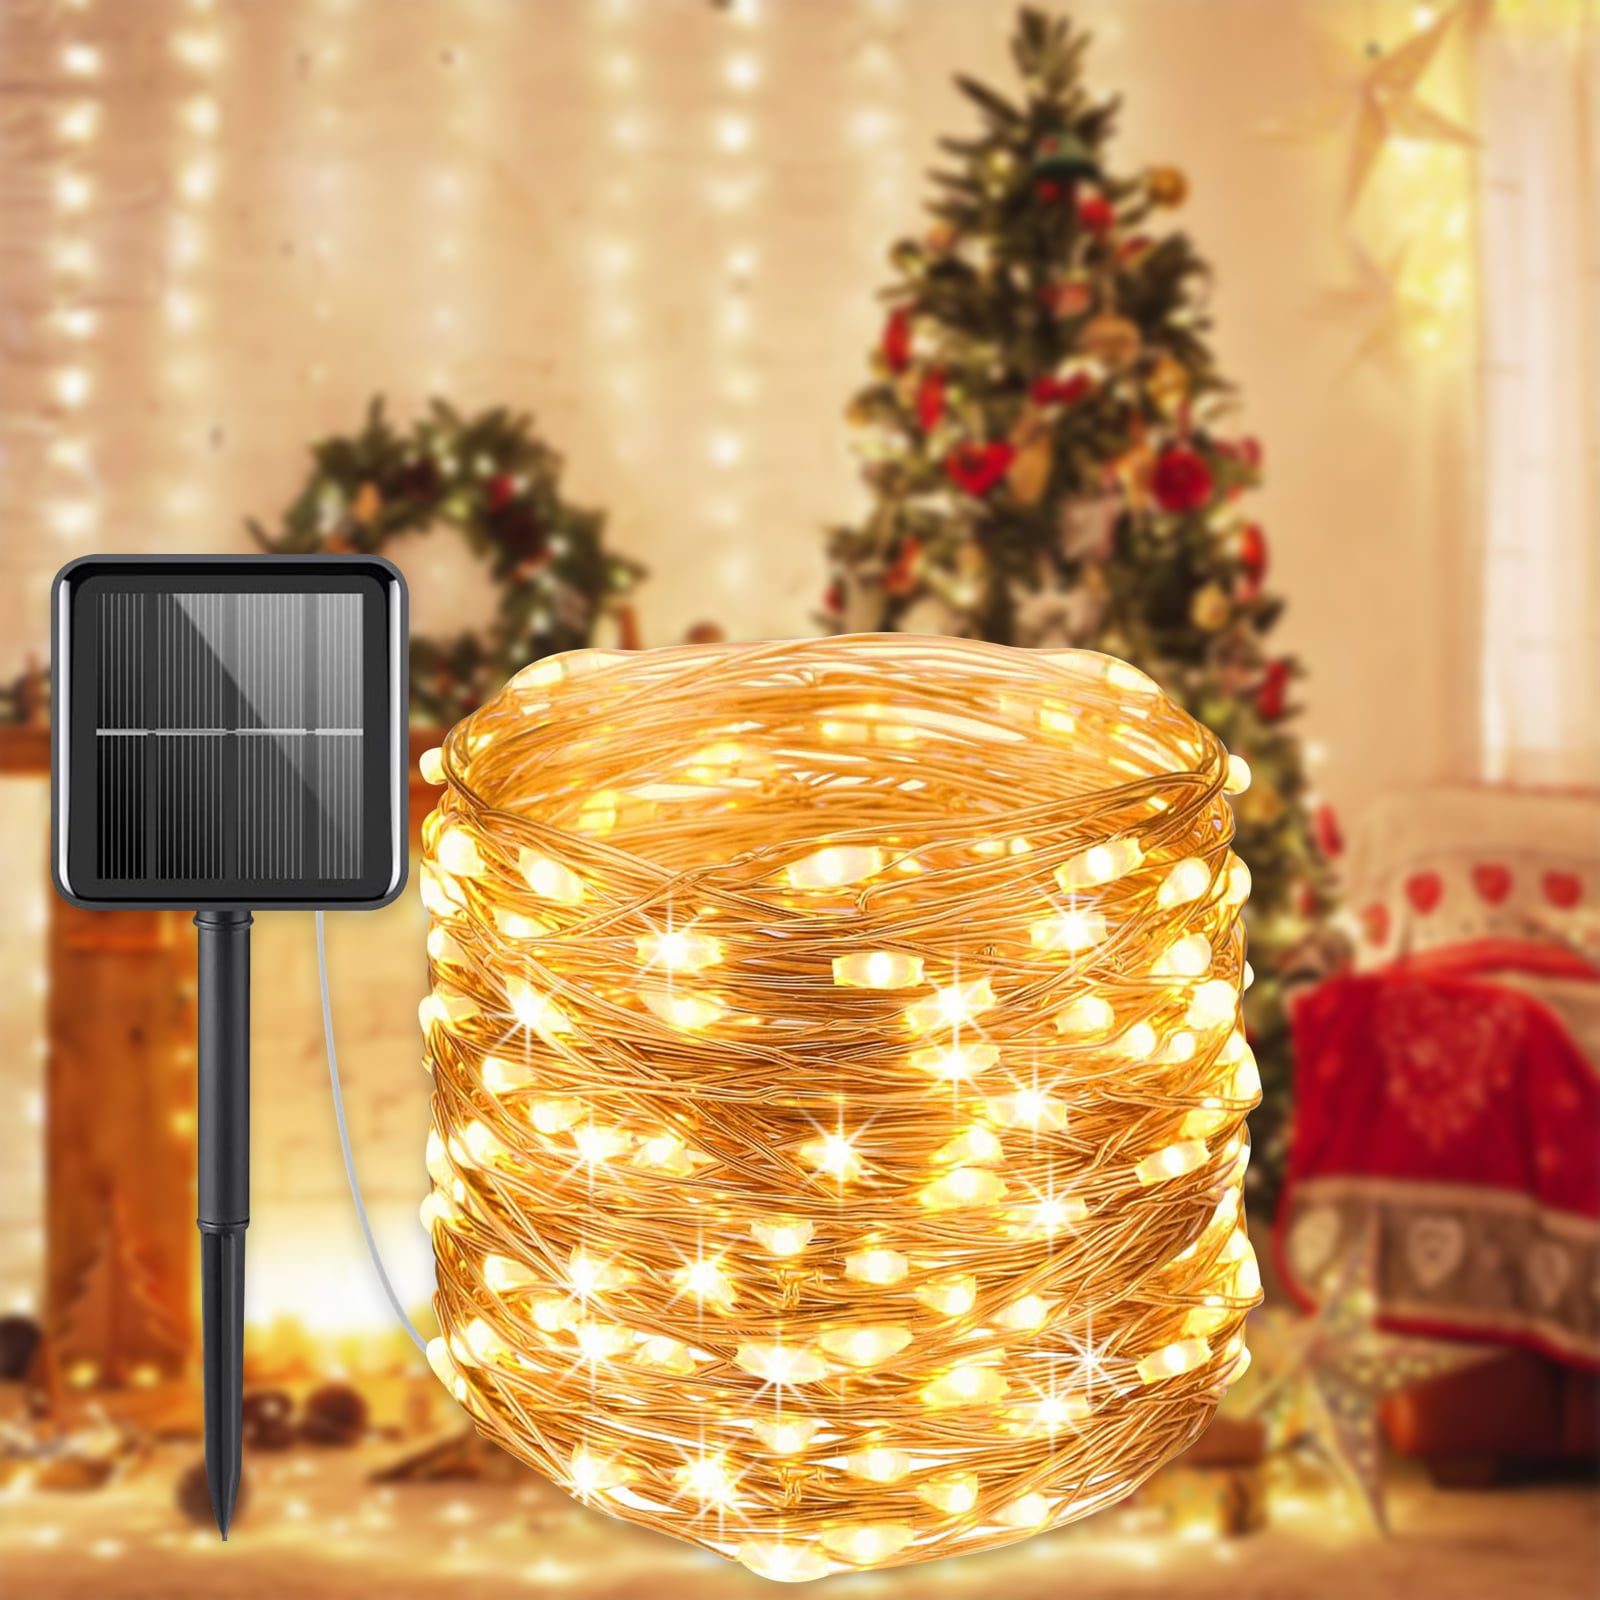 LED Lights Fairy String Lights for Christmas Holiday Party Decor Expandable 33ft 